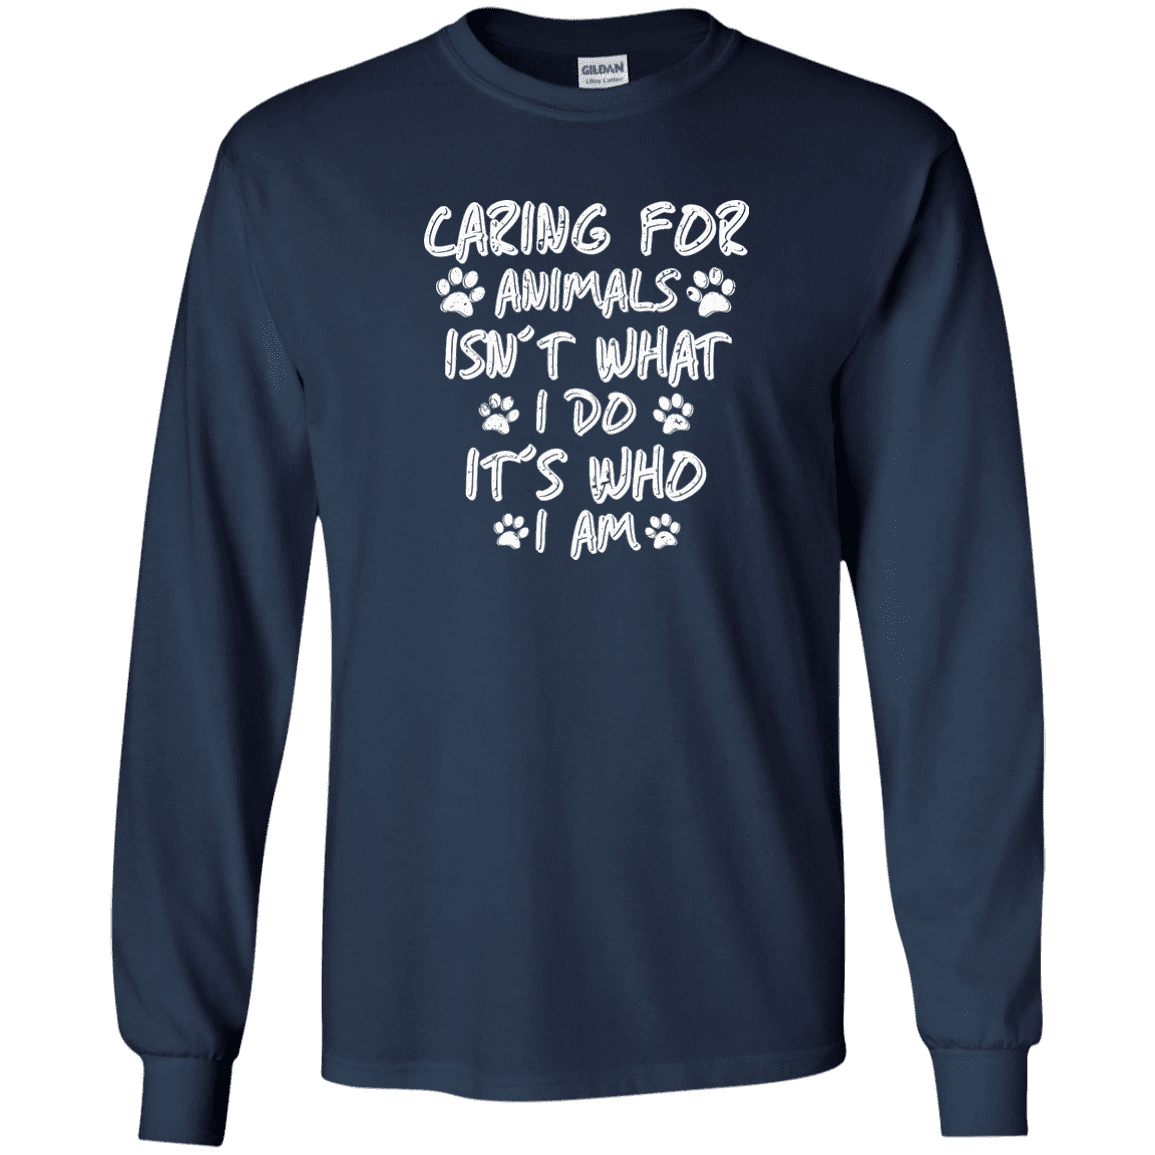 Caring For Animals - Long Sleeve T Shirt – Rescuers Club